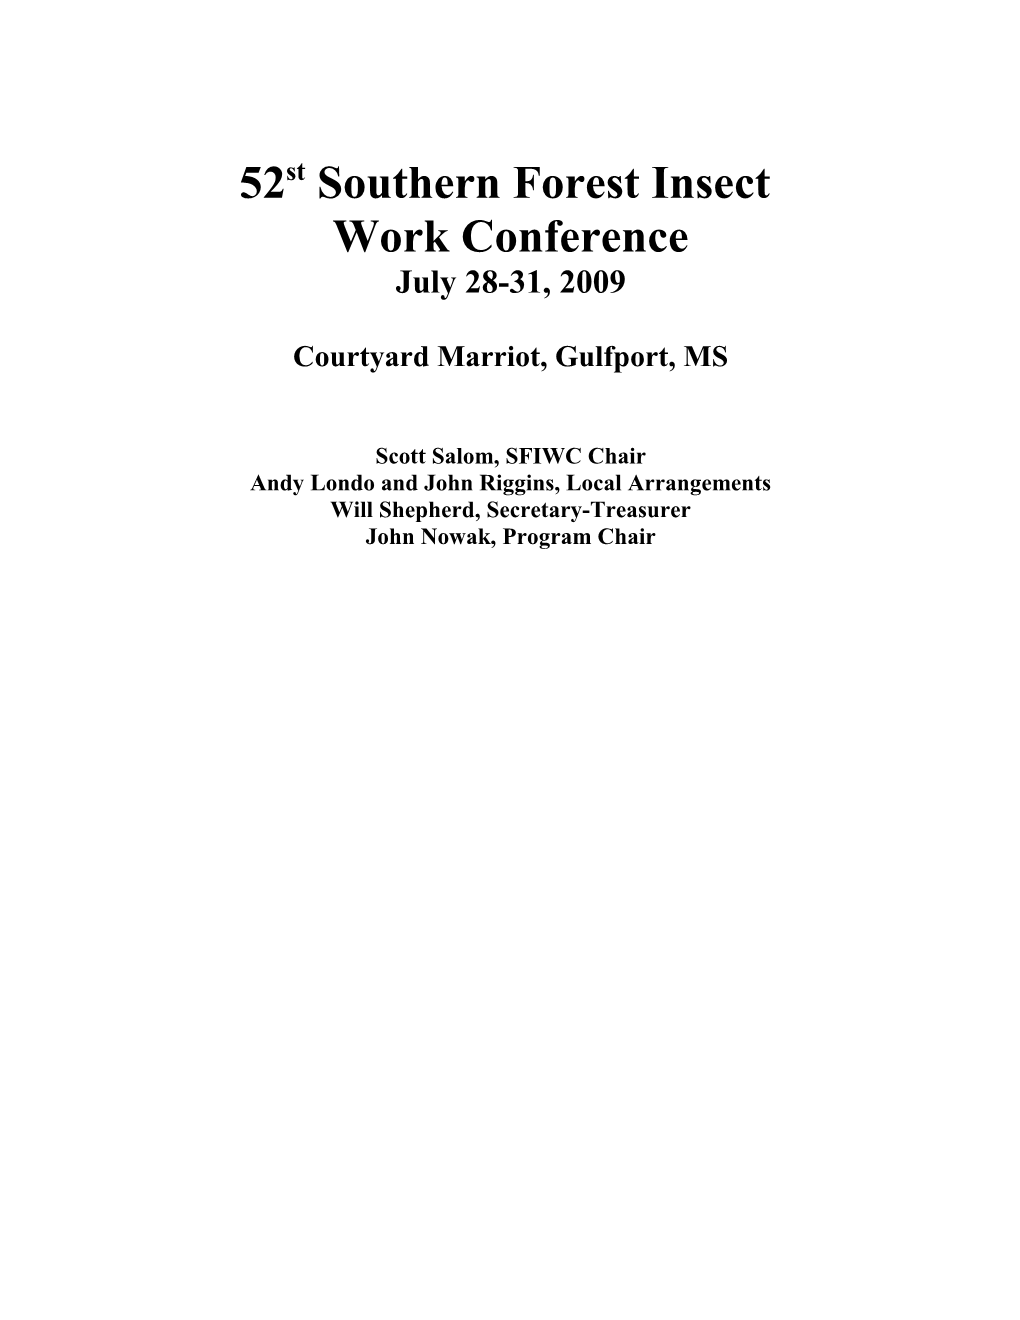 51St Southern Forest Insect Work Conference, Chattanooga, TN, August 4-7